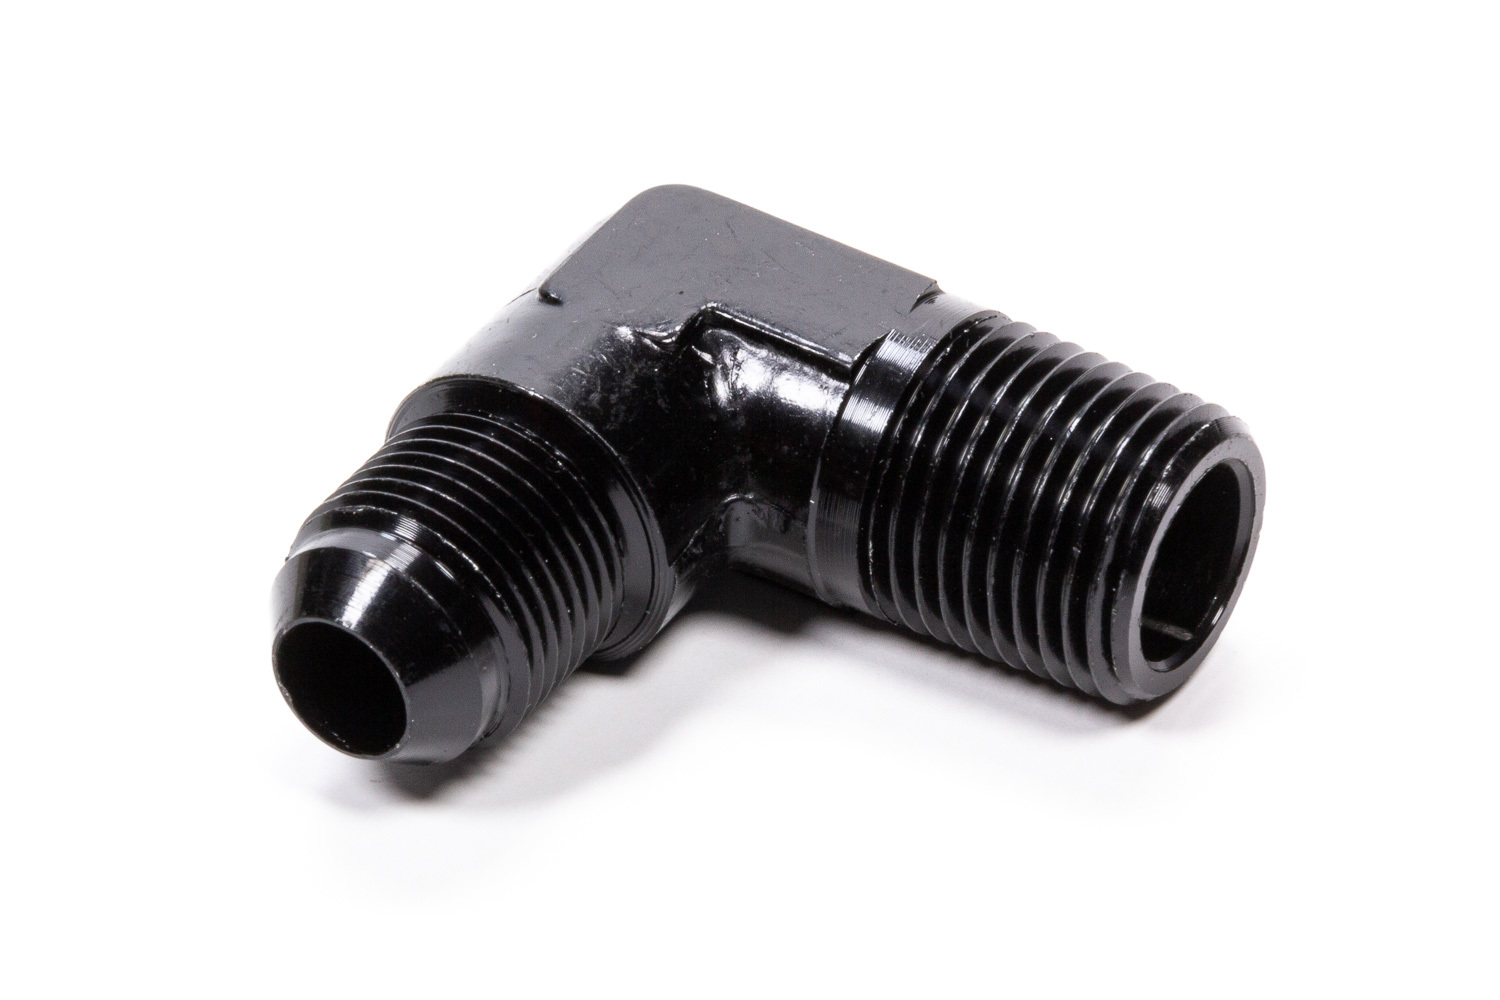 Fragola 482288-BL Fitting, Adapter, 90 Degree, 8 AN Male to 1/2 in NPT Male, Aluminum, Black Anodized, Each